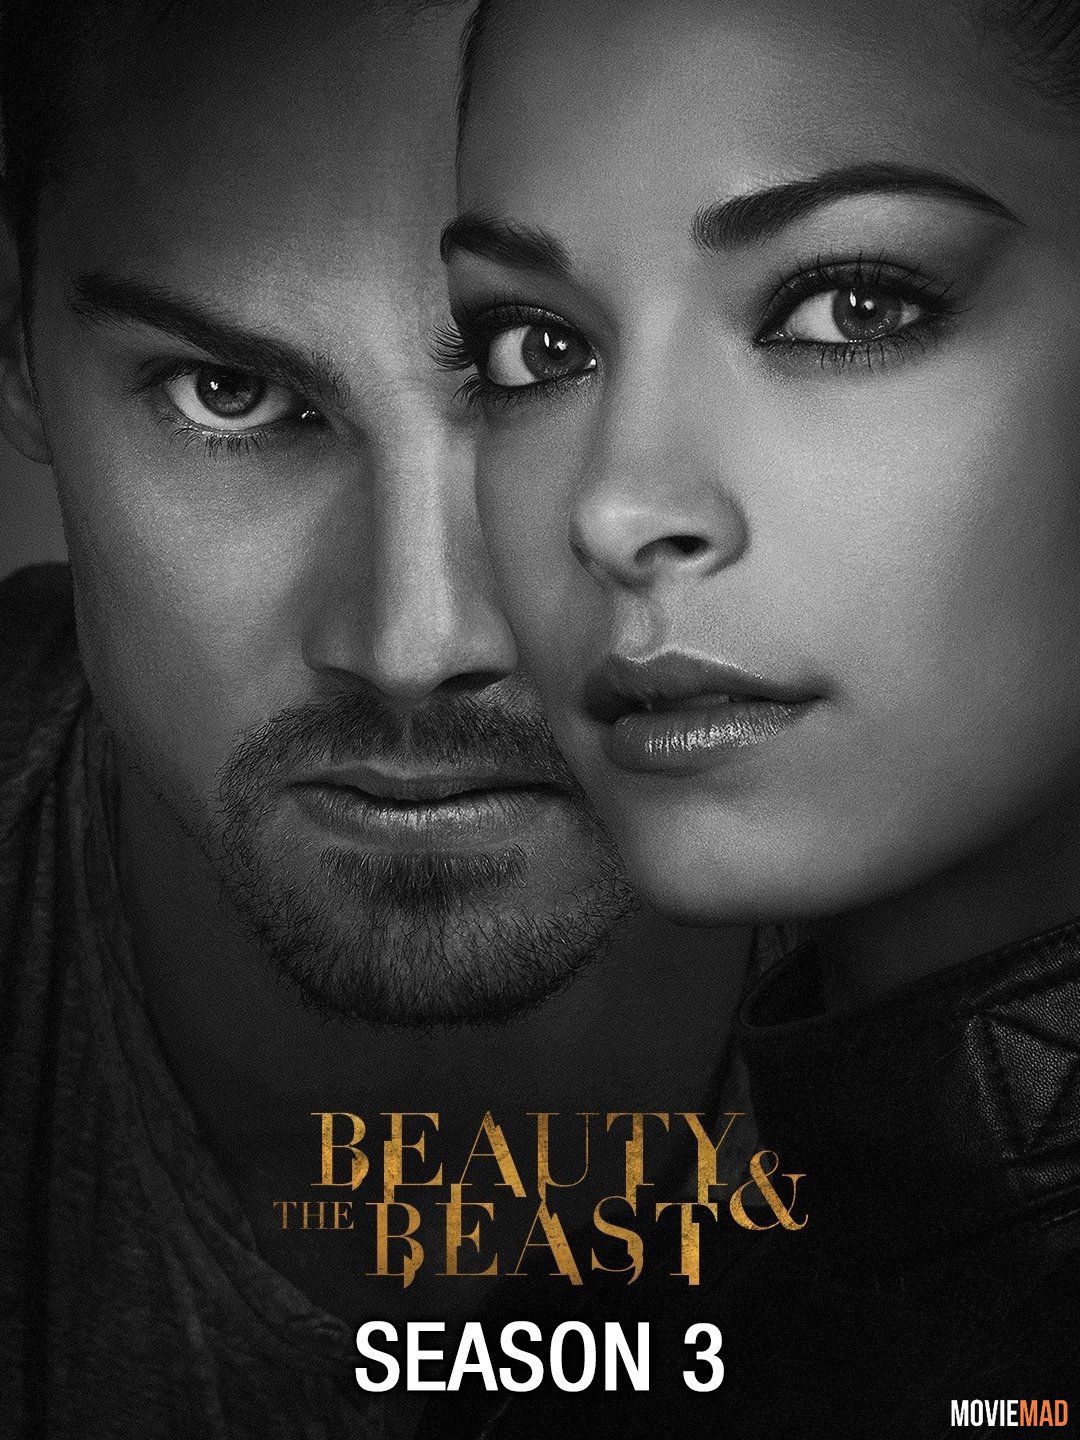 Beauty And The Beast (2015) Season 3 (Episode 1 to 5) Hindi Dubbed Complete Series